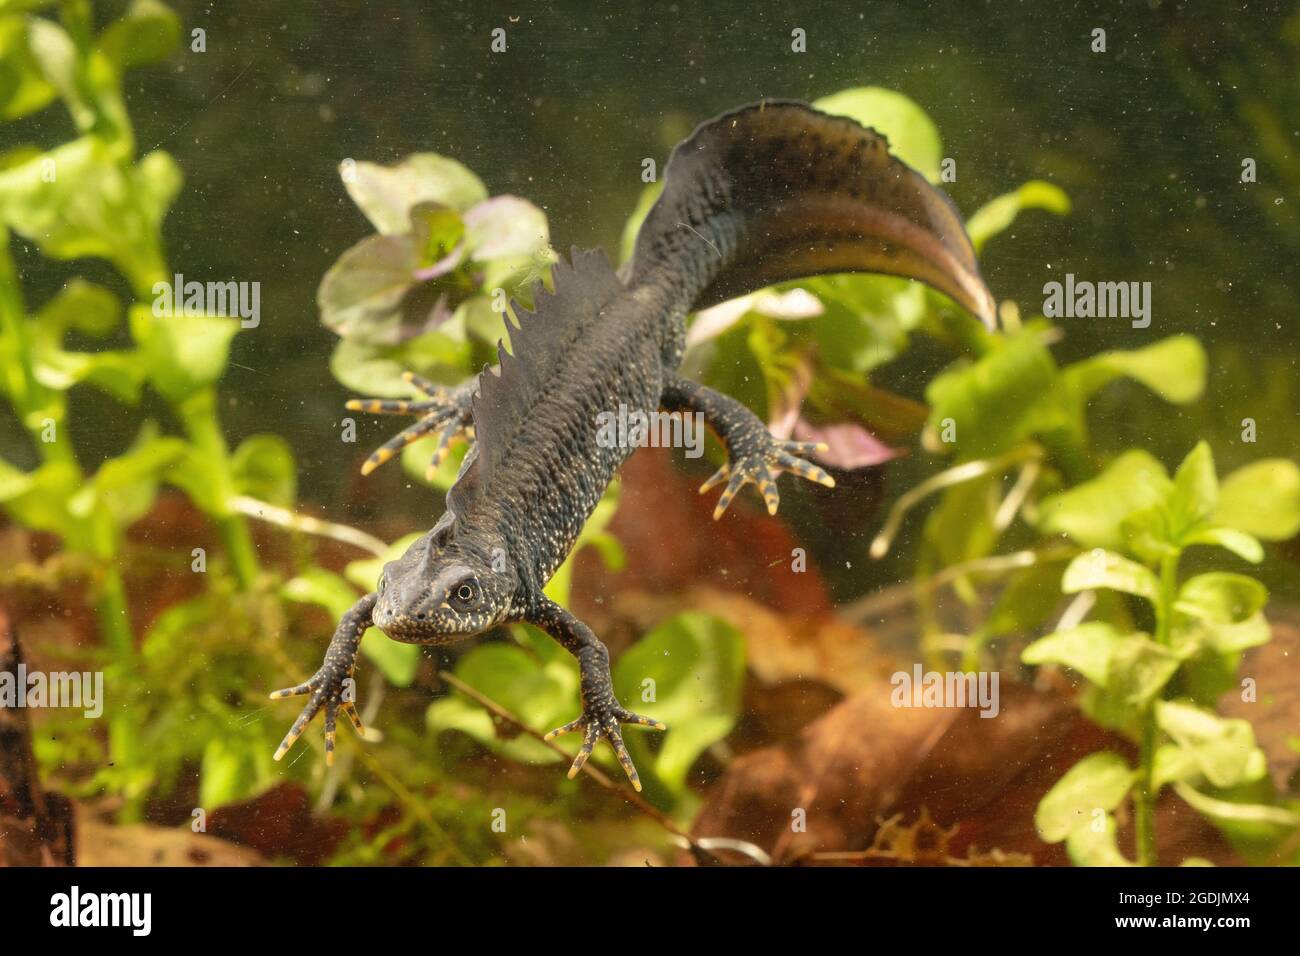 warty newt, crested newt, European crested newt (Triturus cristatus), male with nuptial colouration, front view, Germany Stock Photo